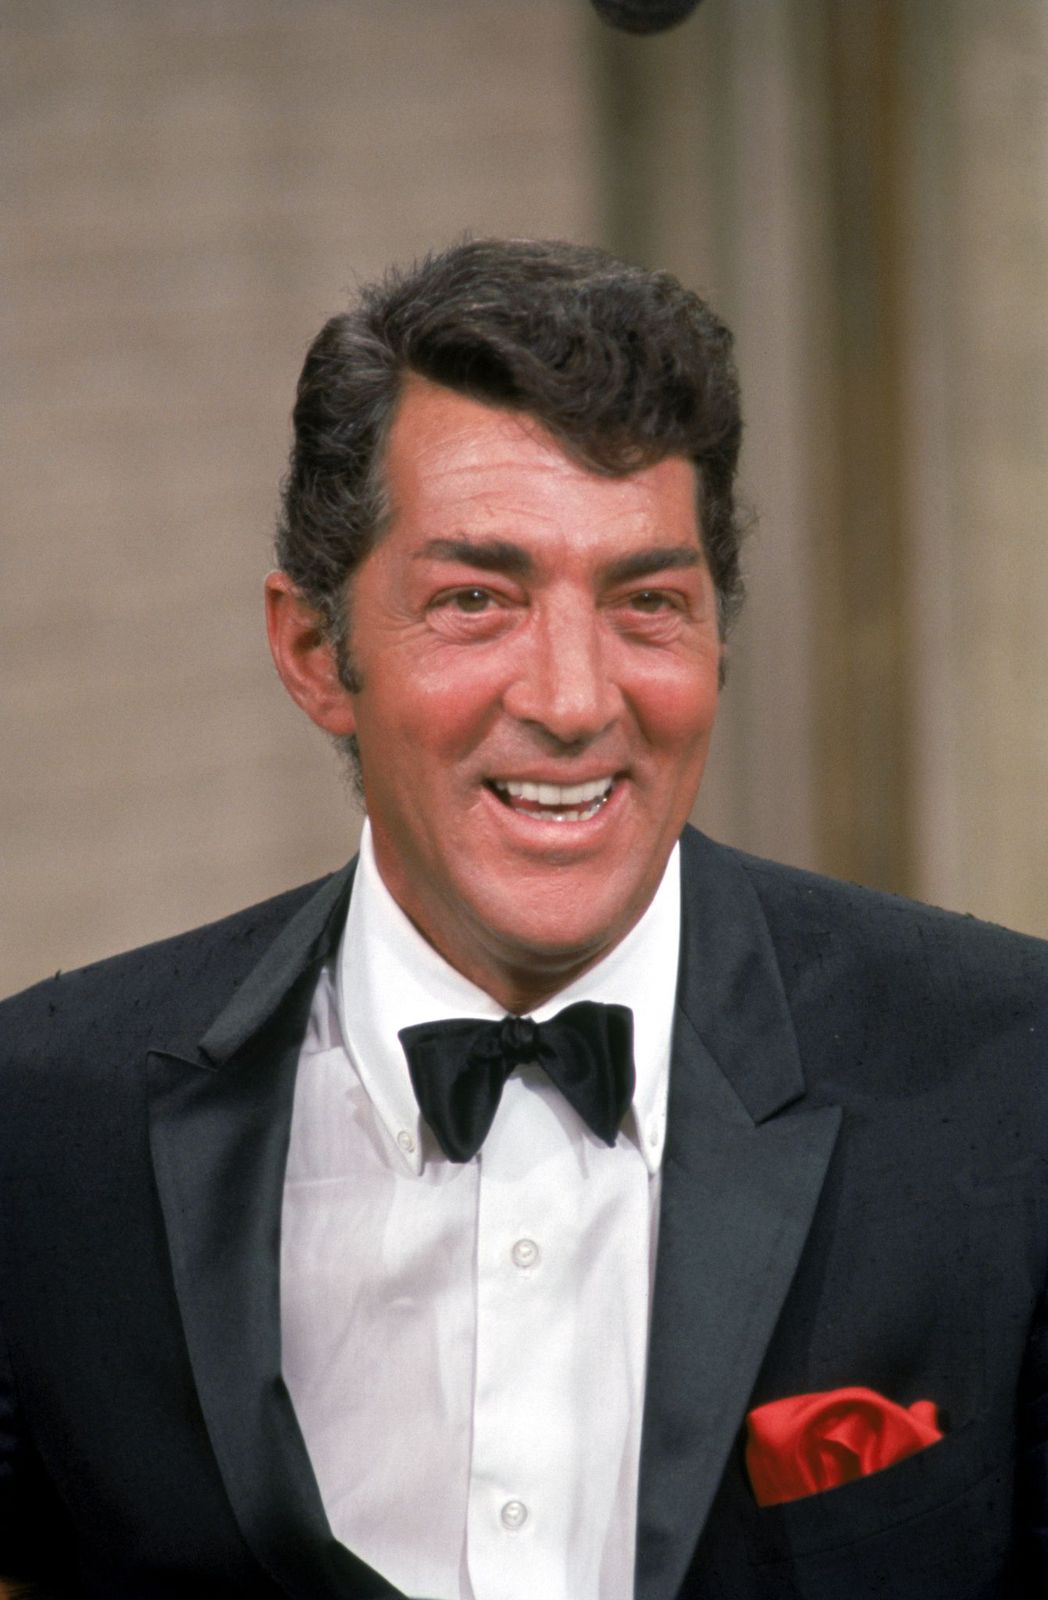 Dean Martin on the set during filming of "The Dean Martin show" in 1967 | Photo: Getty Images